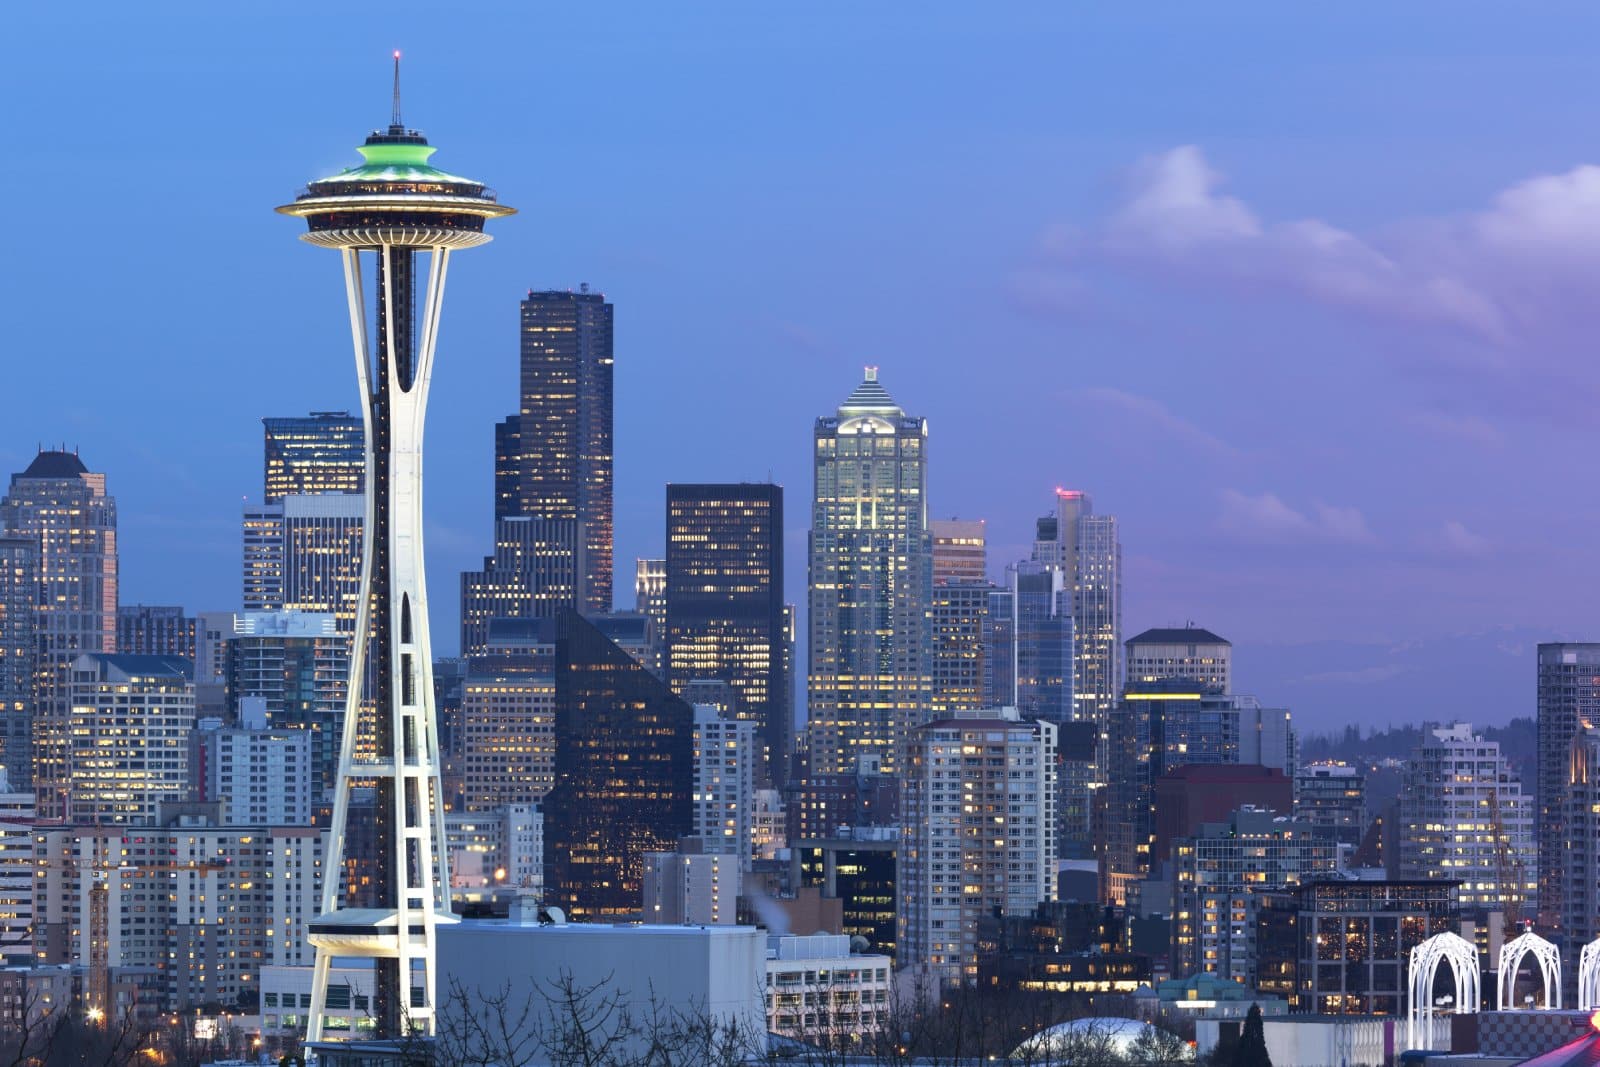 Image Credit: Shutterstock / TinaImages <p><span>Soar to new heights with stunning views of Seattle from the Space Needle. It’s an icon not to be missed, though the ticket line can be long. Book in advance.</span></p>